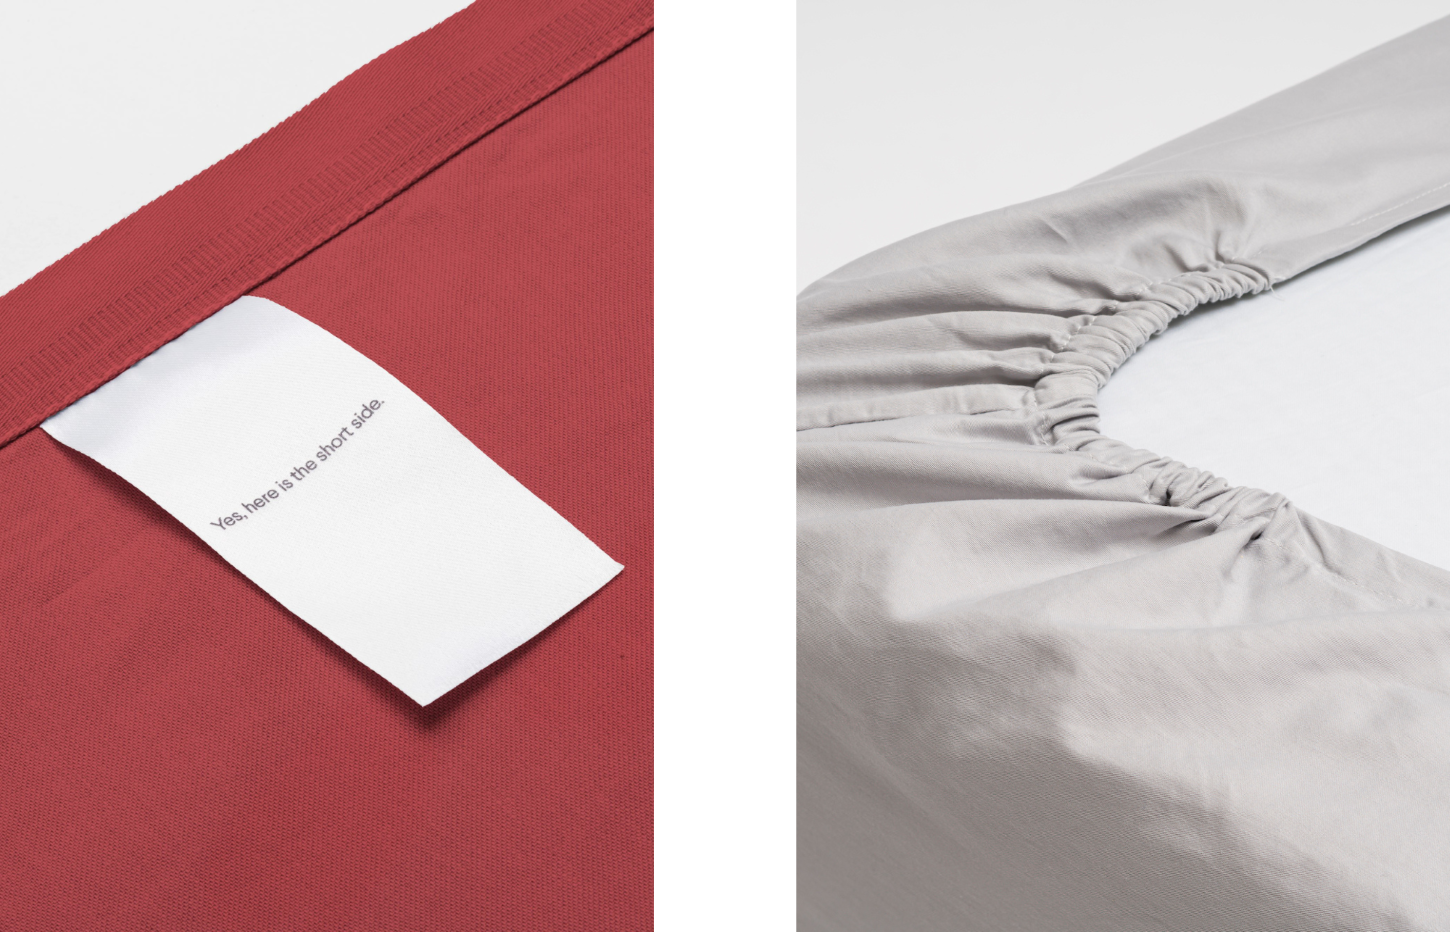 New shades of our 100% cotton bedsheets.